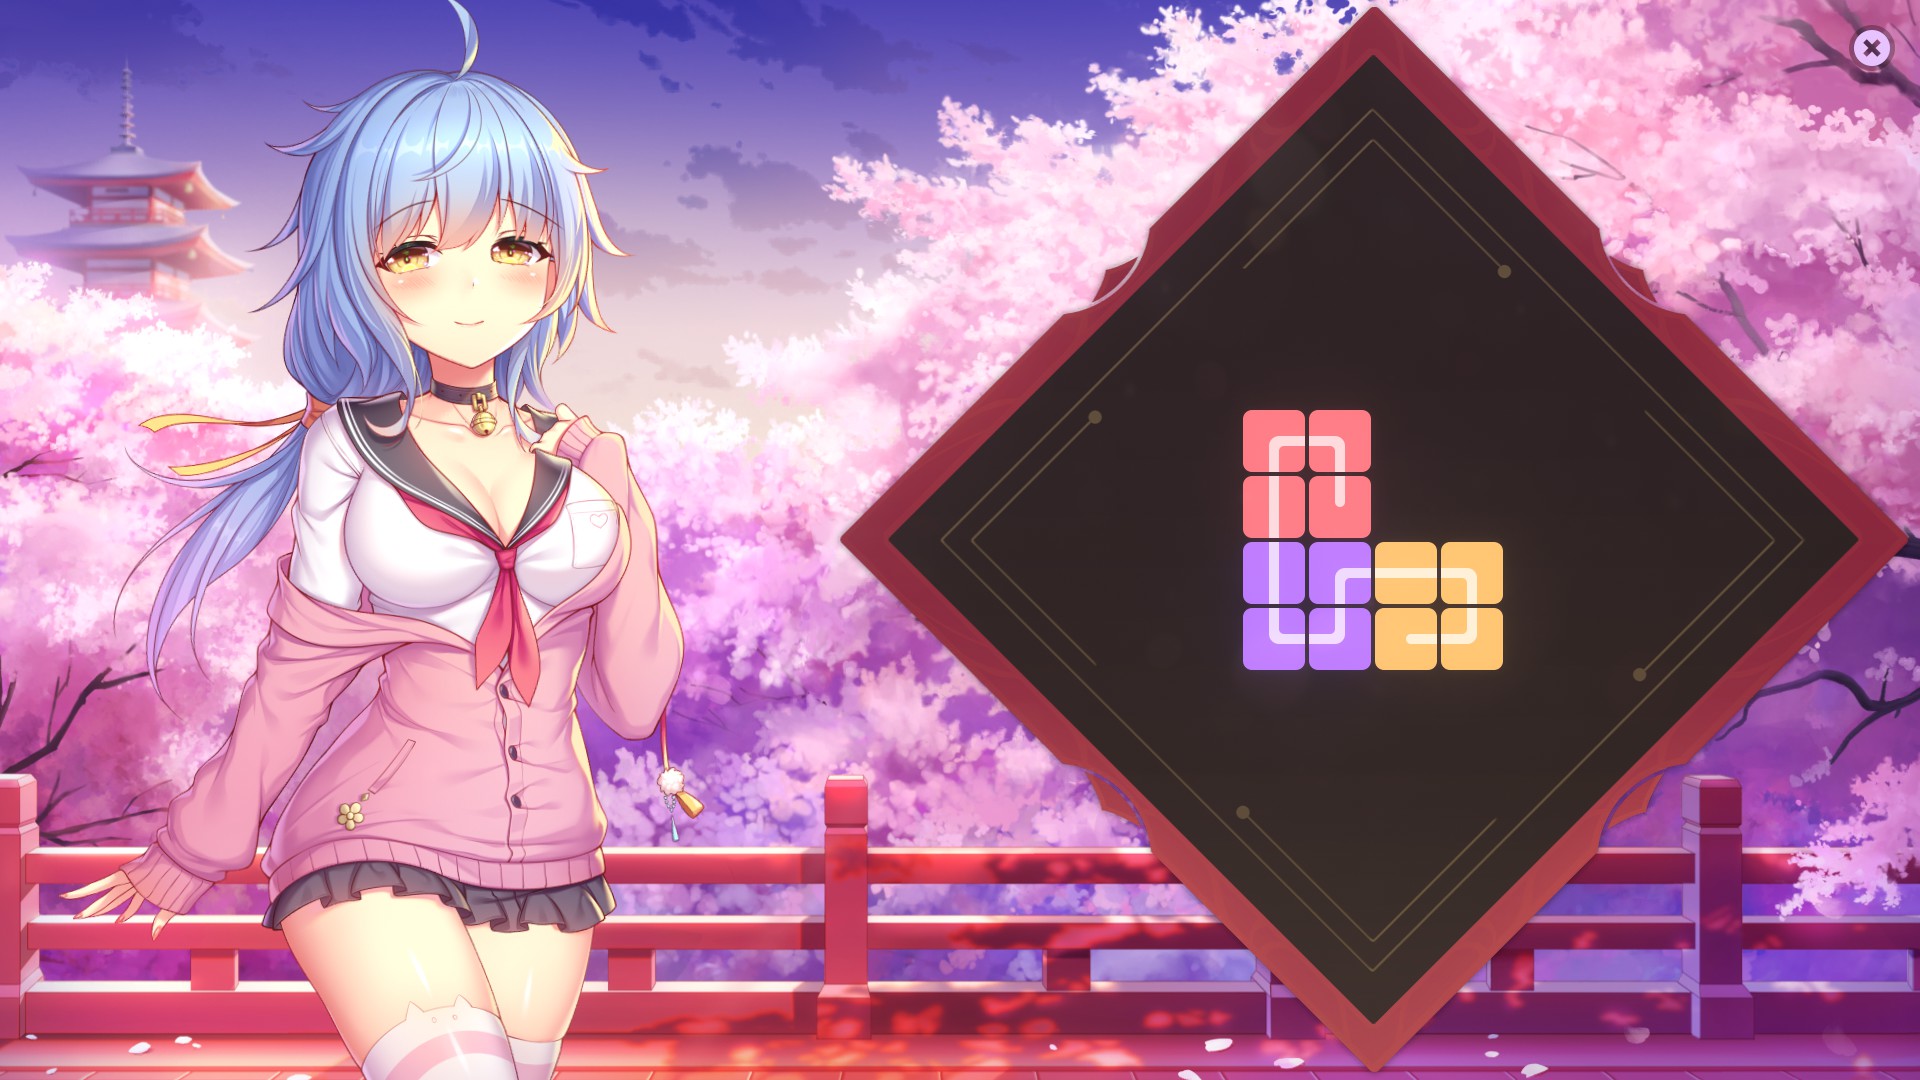 Sakura Hime 2 - Complete Achievement Guide +Walkthrough - Images of completed levels - 14CC08C